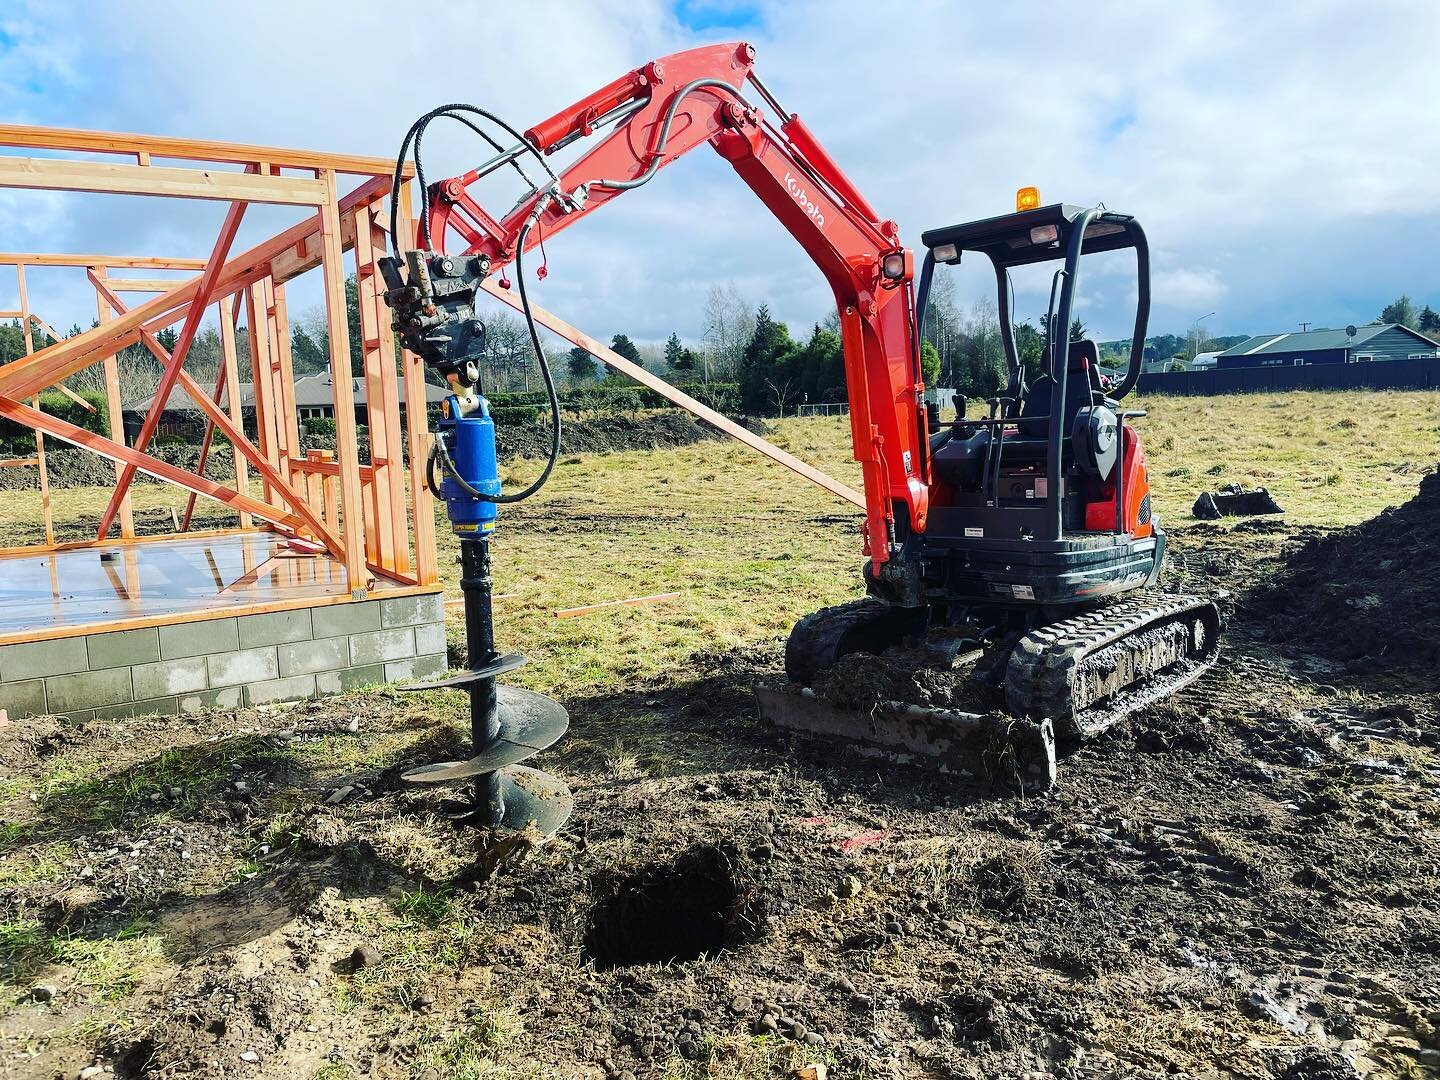 New attachment for the digger makes fence and post holes a breeze now.🤟